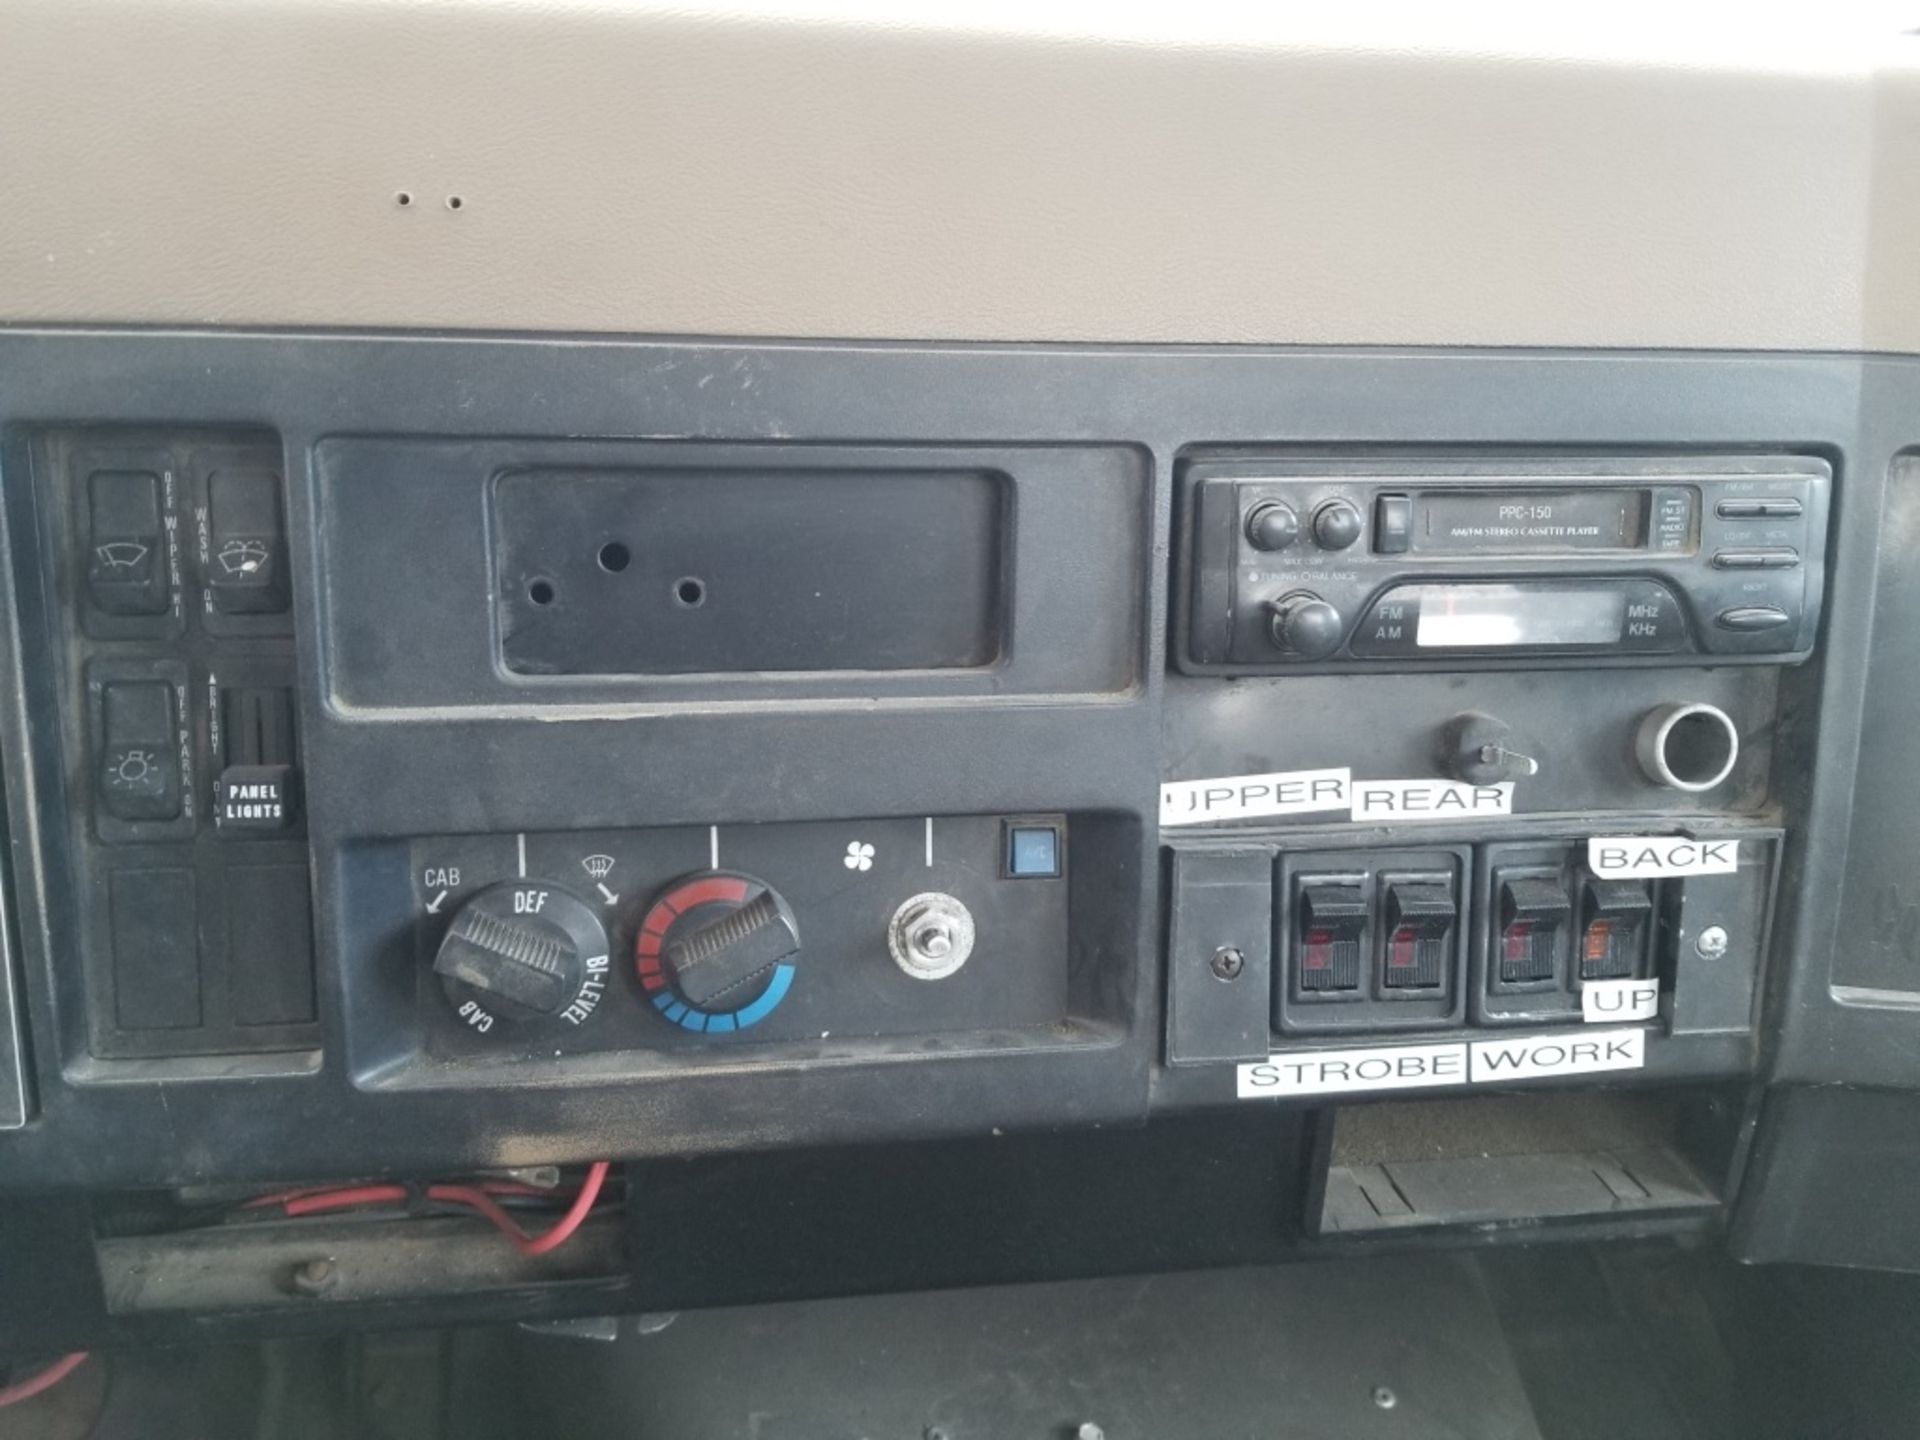 1991 International 4700 Cab & Chassis - Image 15 of 18